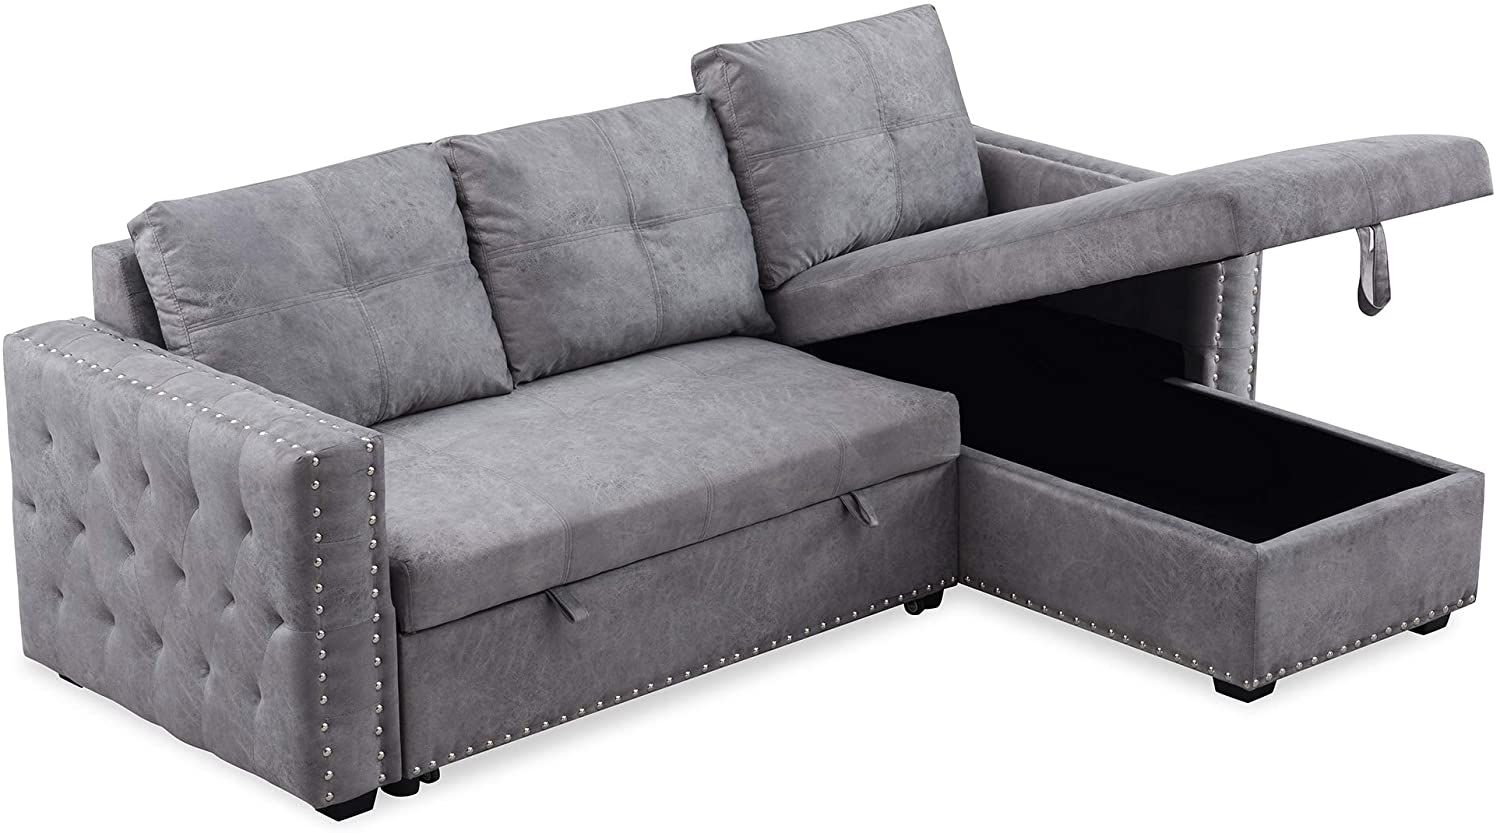 Wholesale 91" Reversible Sleeper Sectional Sofa 3 Seat With Nail Head For 3 Seat Convertible Sectional Sofas (Gallery 18 of 20)